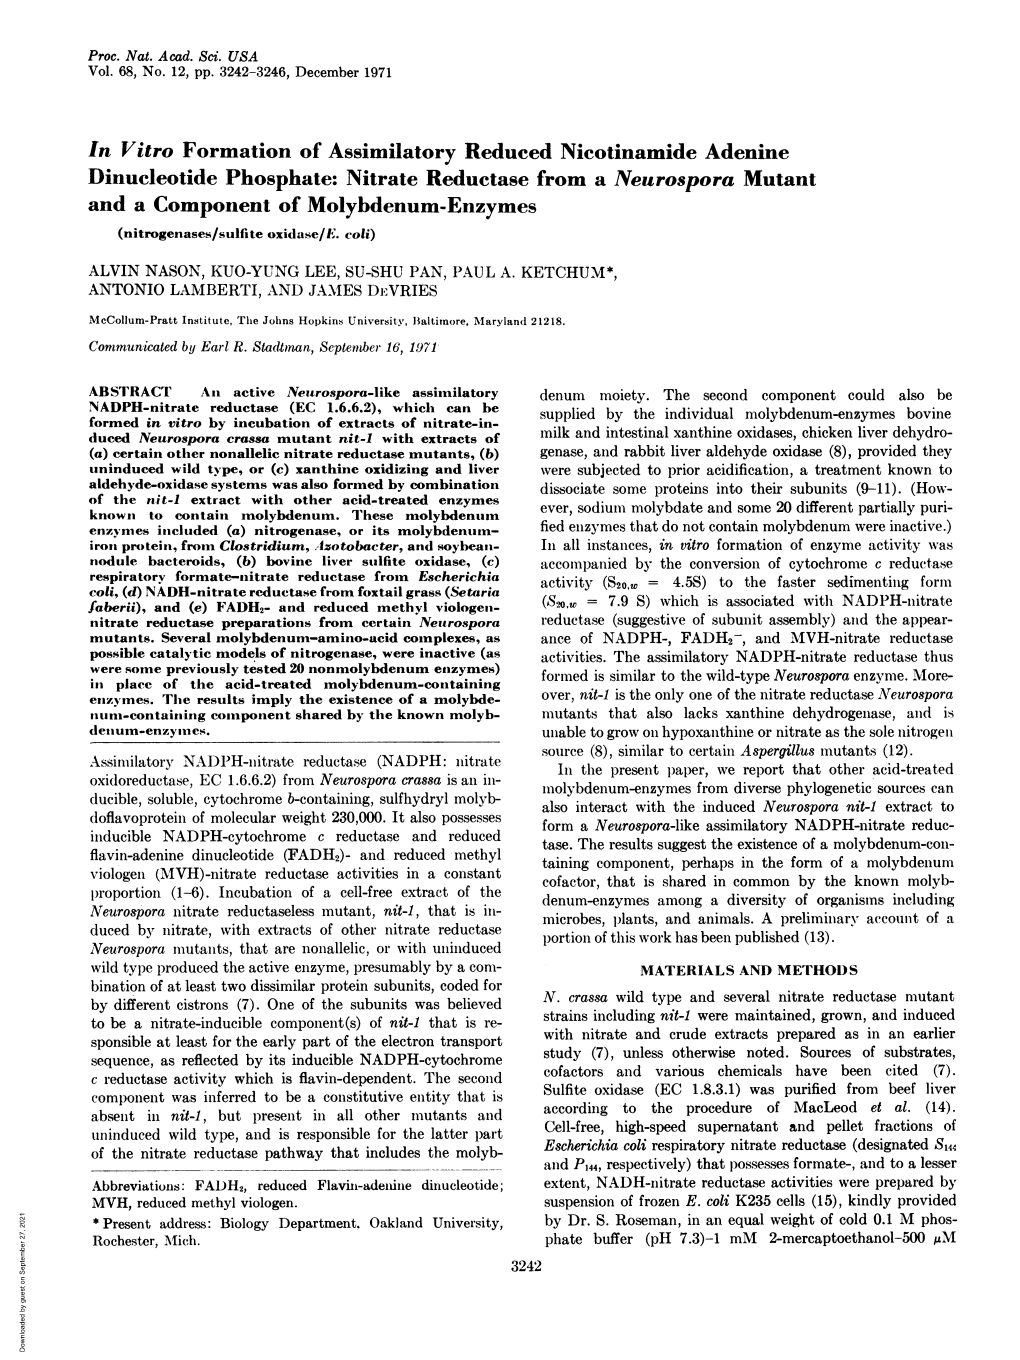 Nitrate Reductase from a Neurospora Mutant and a Component of Molybdenum-Enzymes (Nitrogenases/Sulfite Oxidase/E